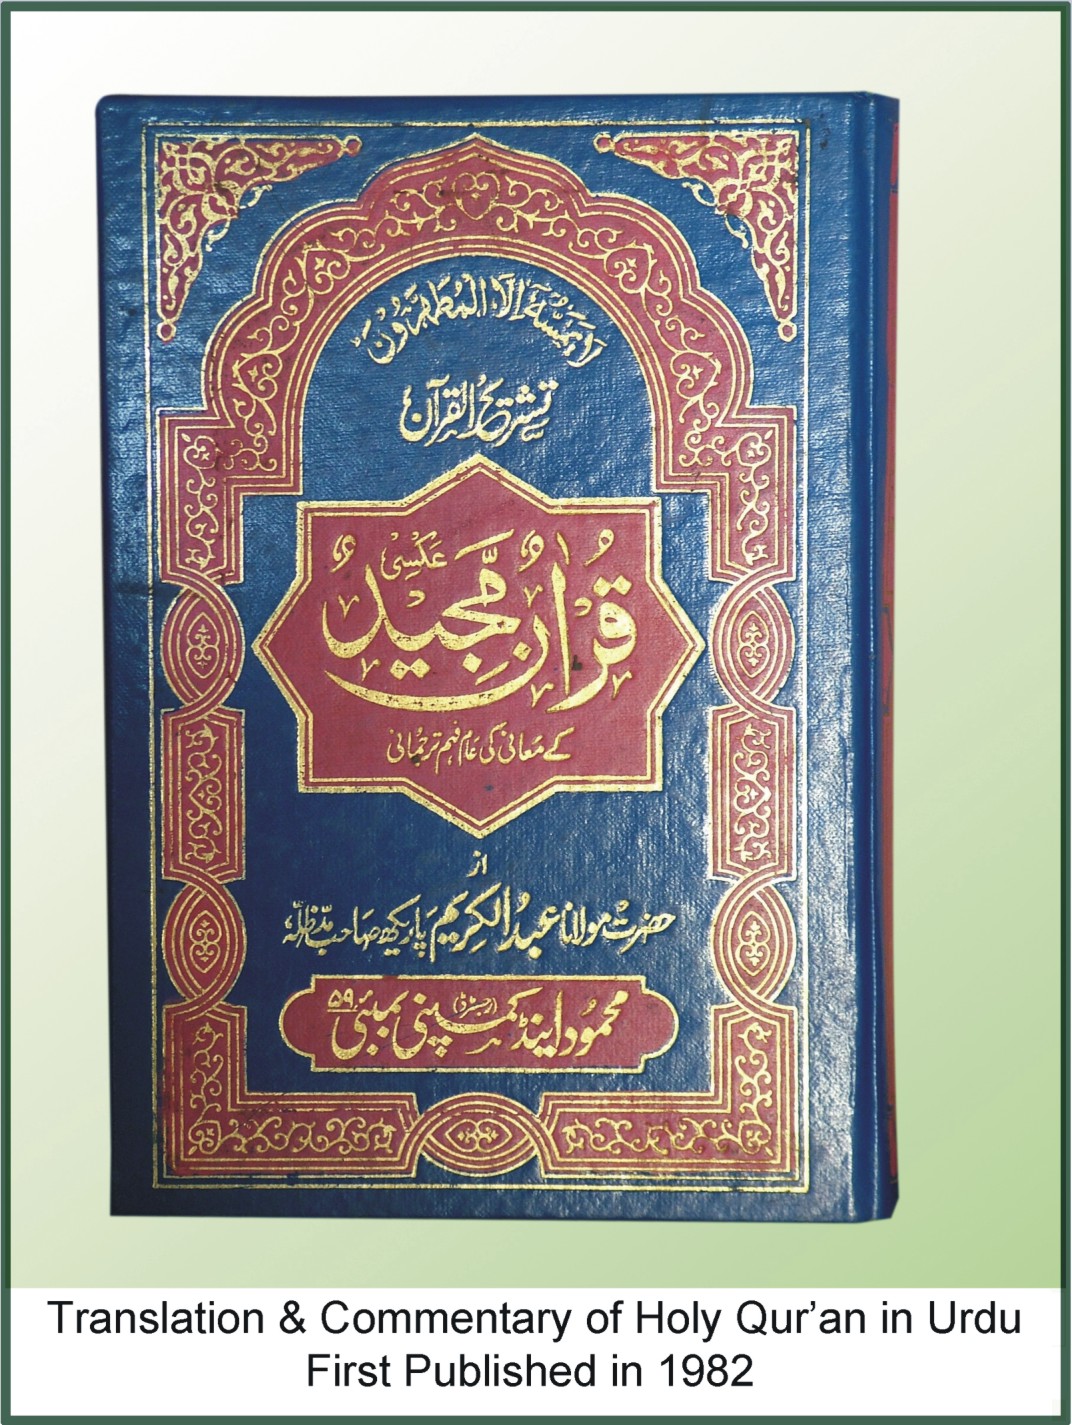 Translation & Commentary of The Holy Qur'an (Urdu) First Published in 1982